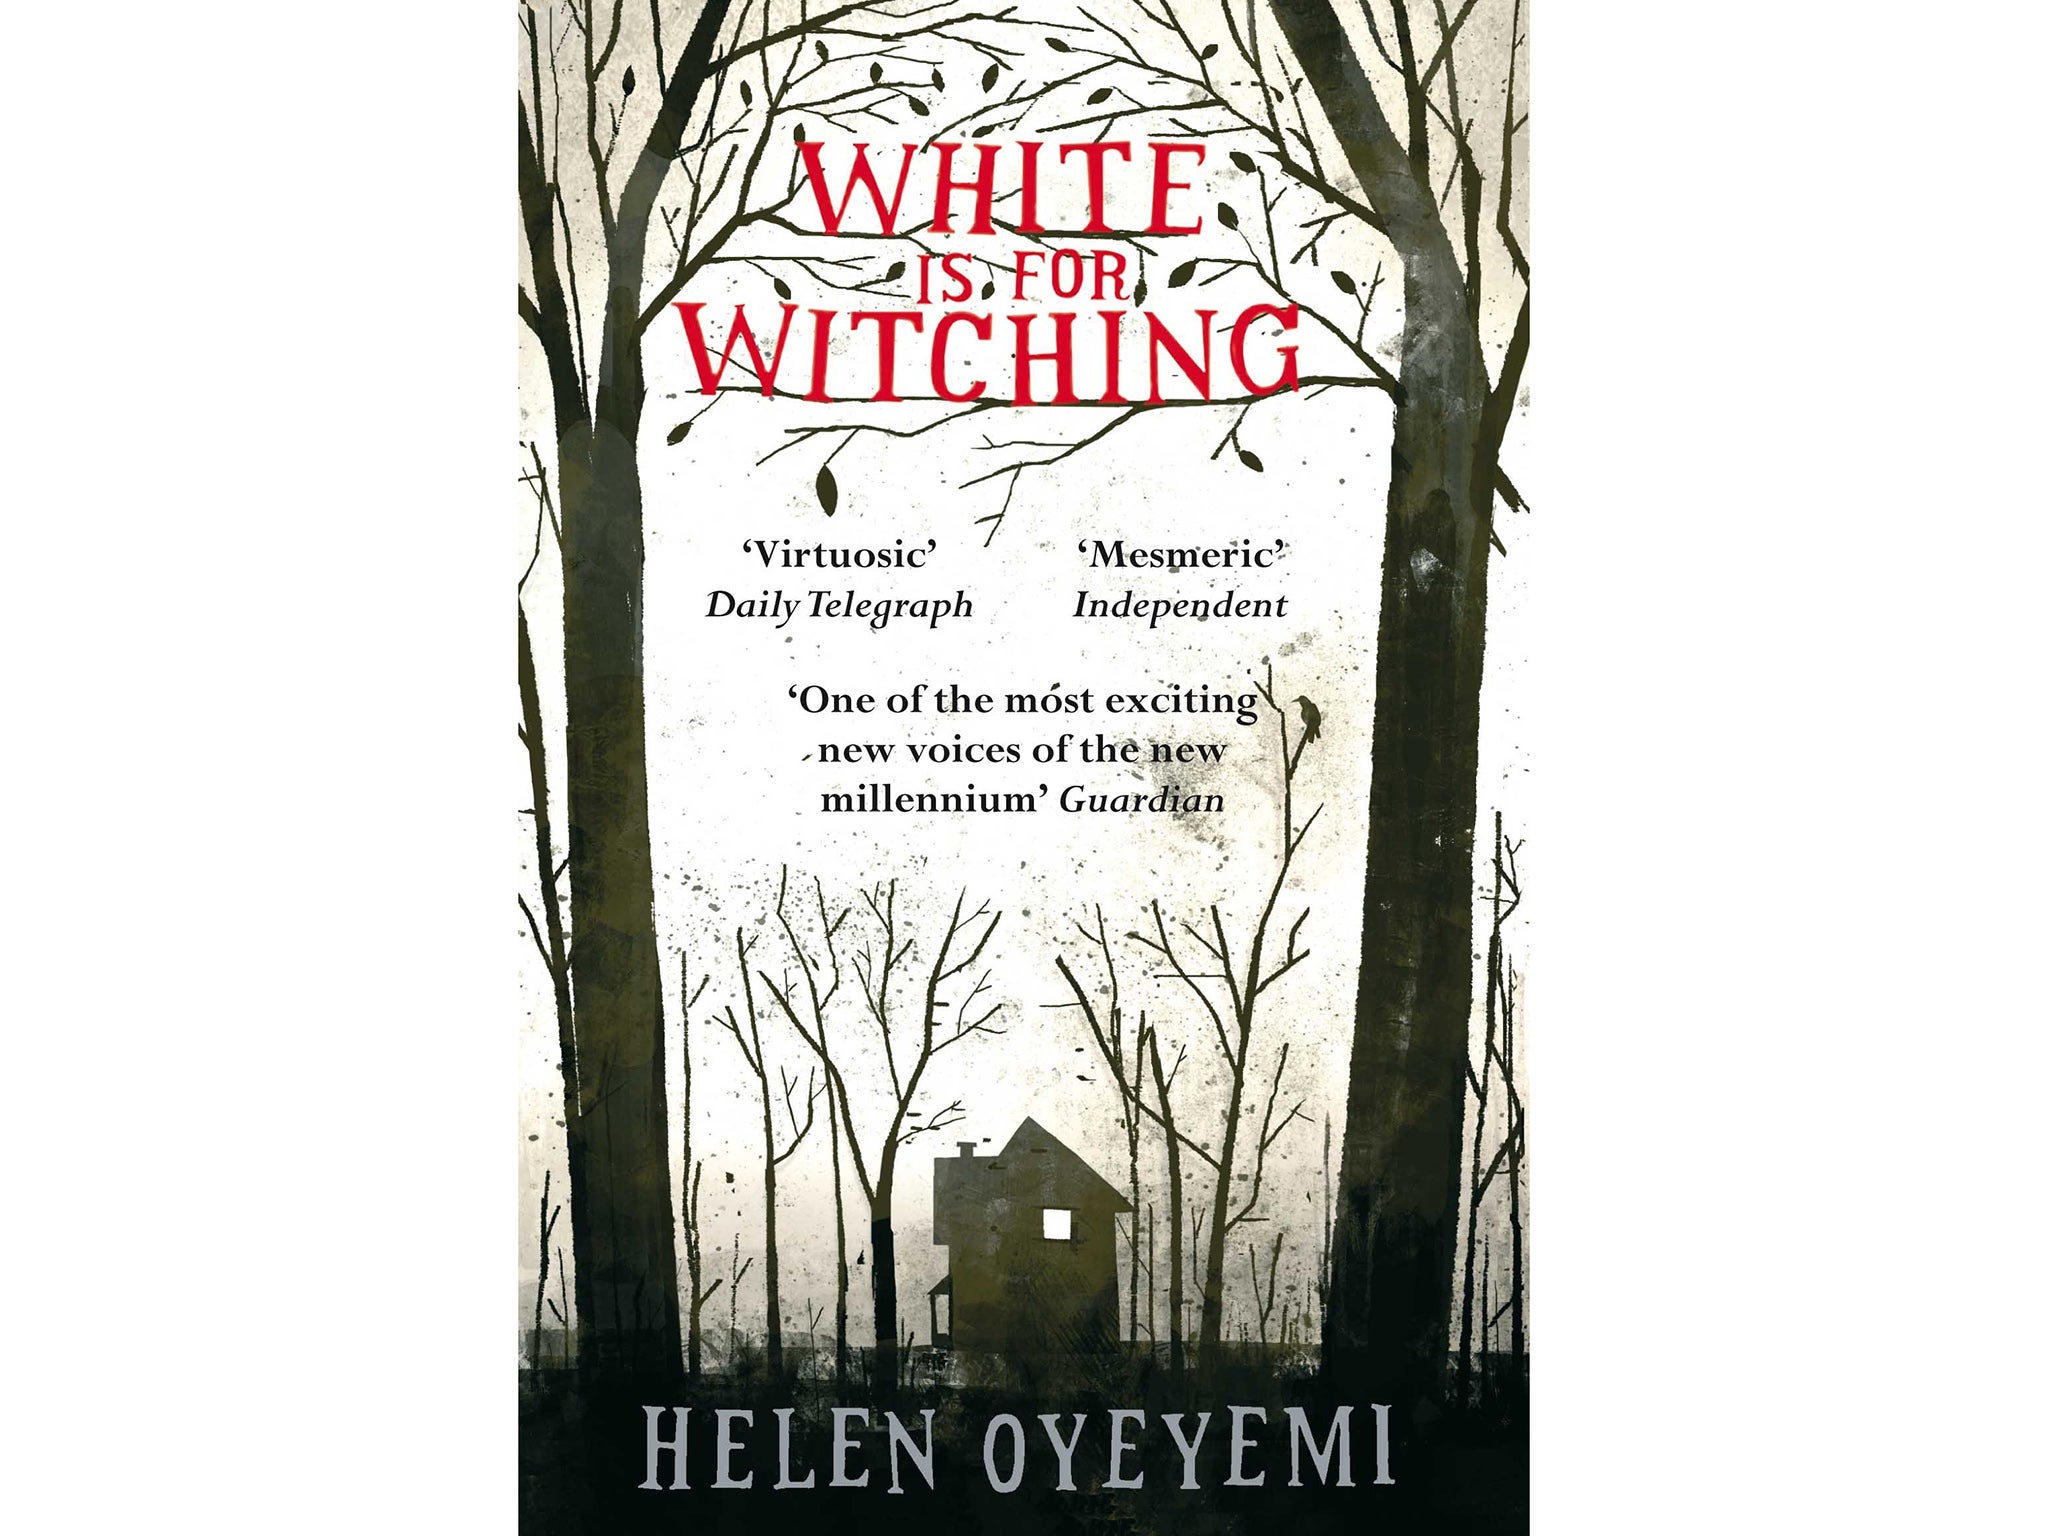 White is for Witching - Helen Oyeyemi